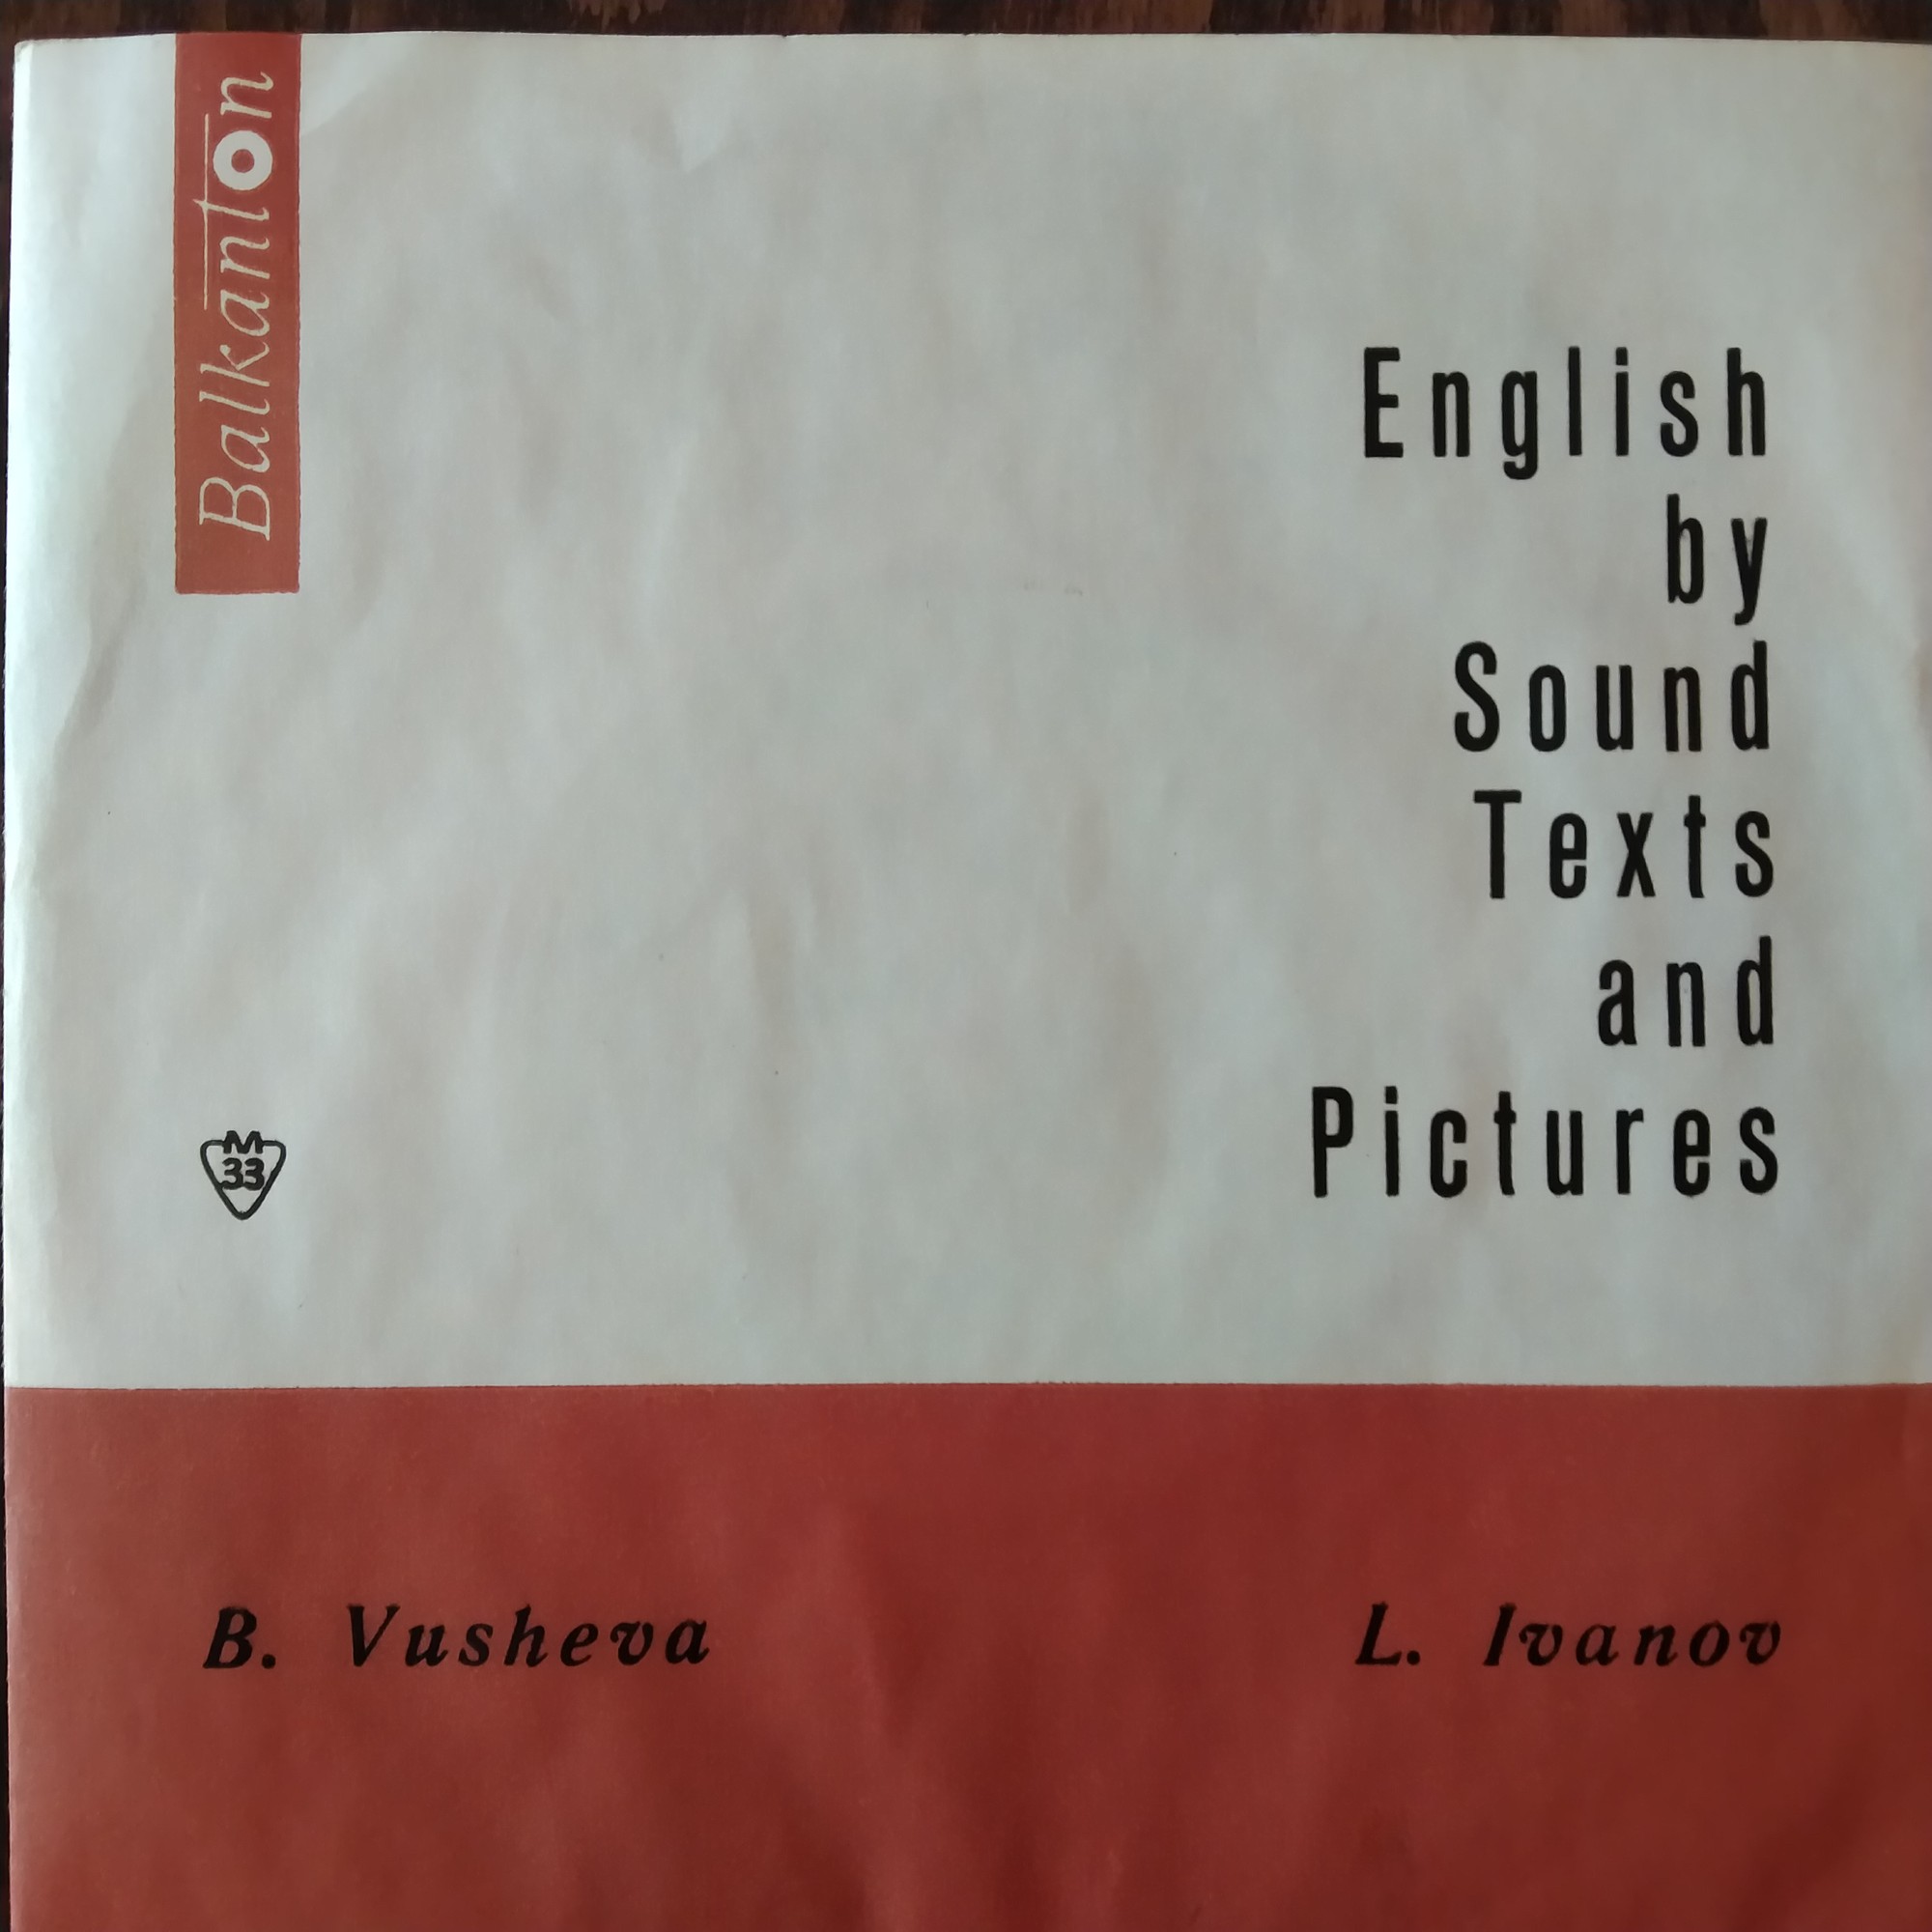 English by sound, text and pictures (by V. Vusheva and L. Ivanov)